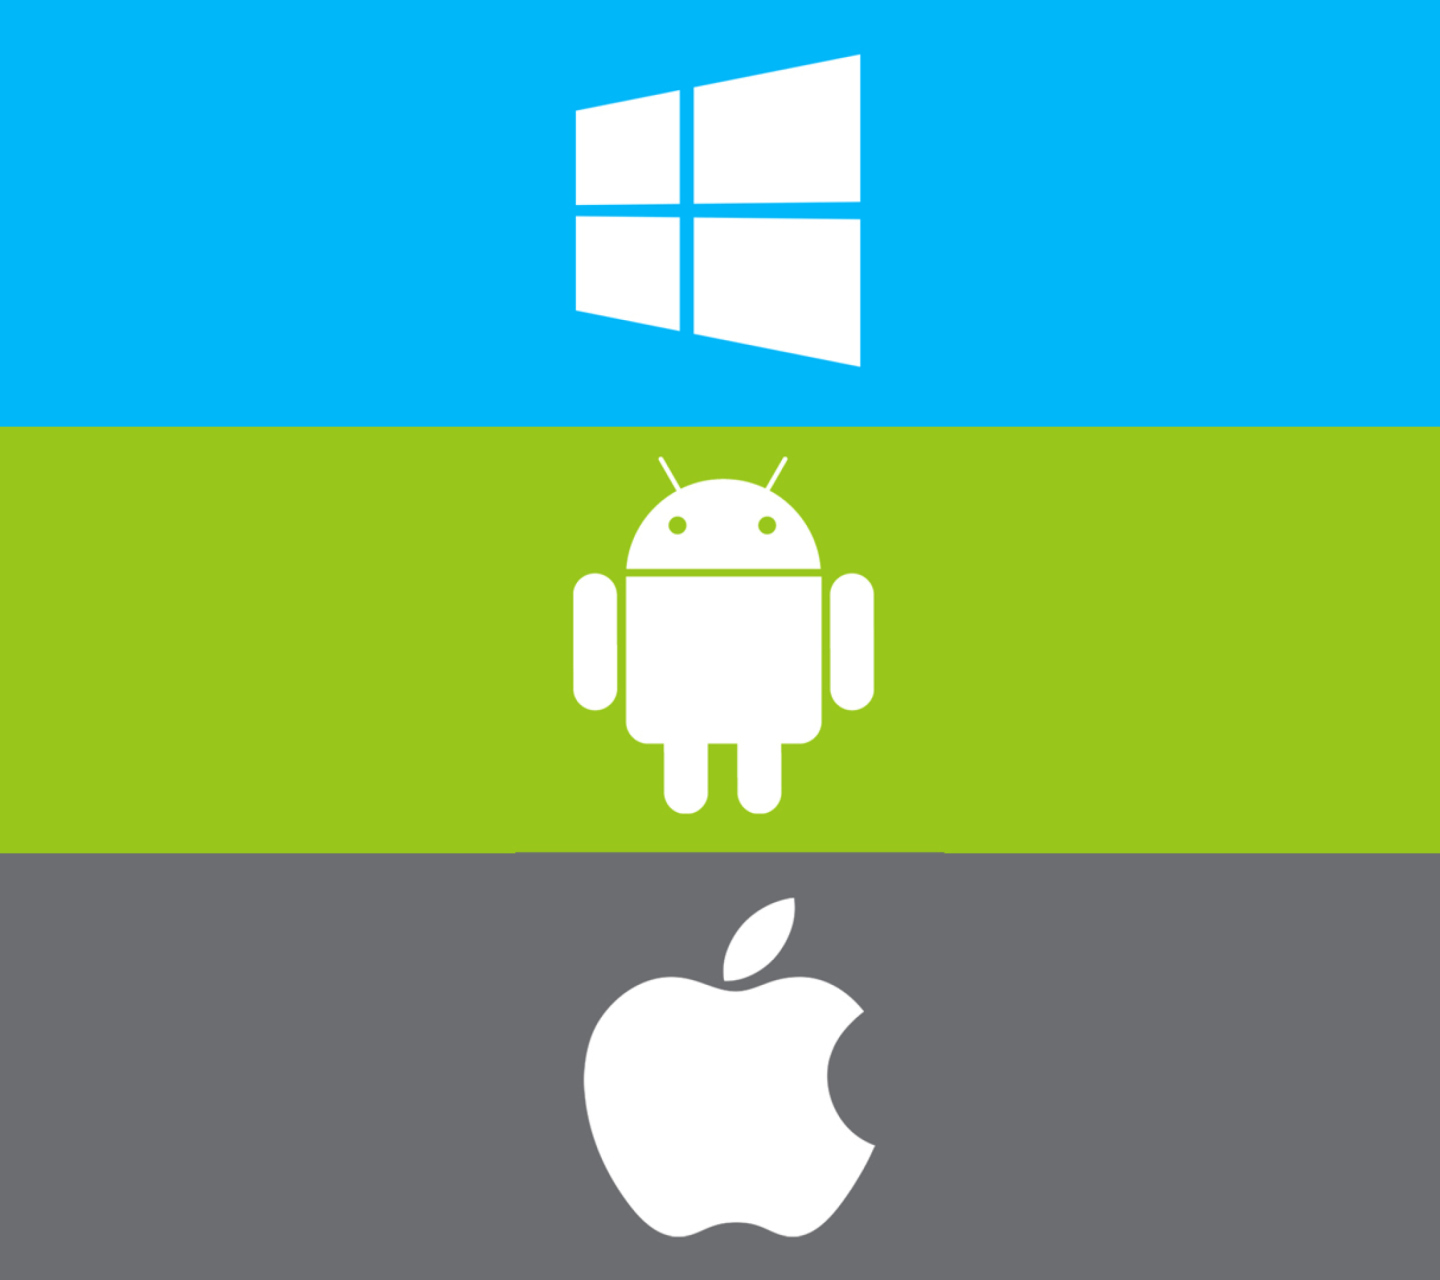 Sfondi Windows, Apple, Android - What's Your Choice? 1440x1280